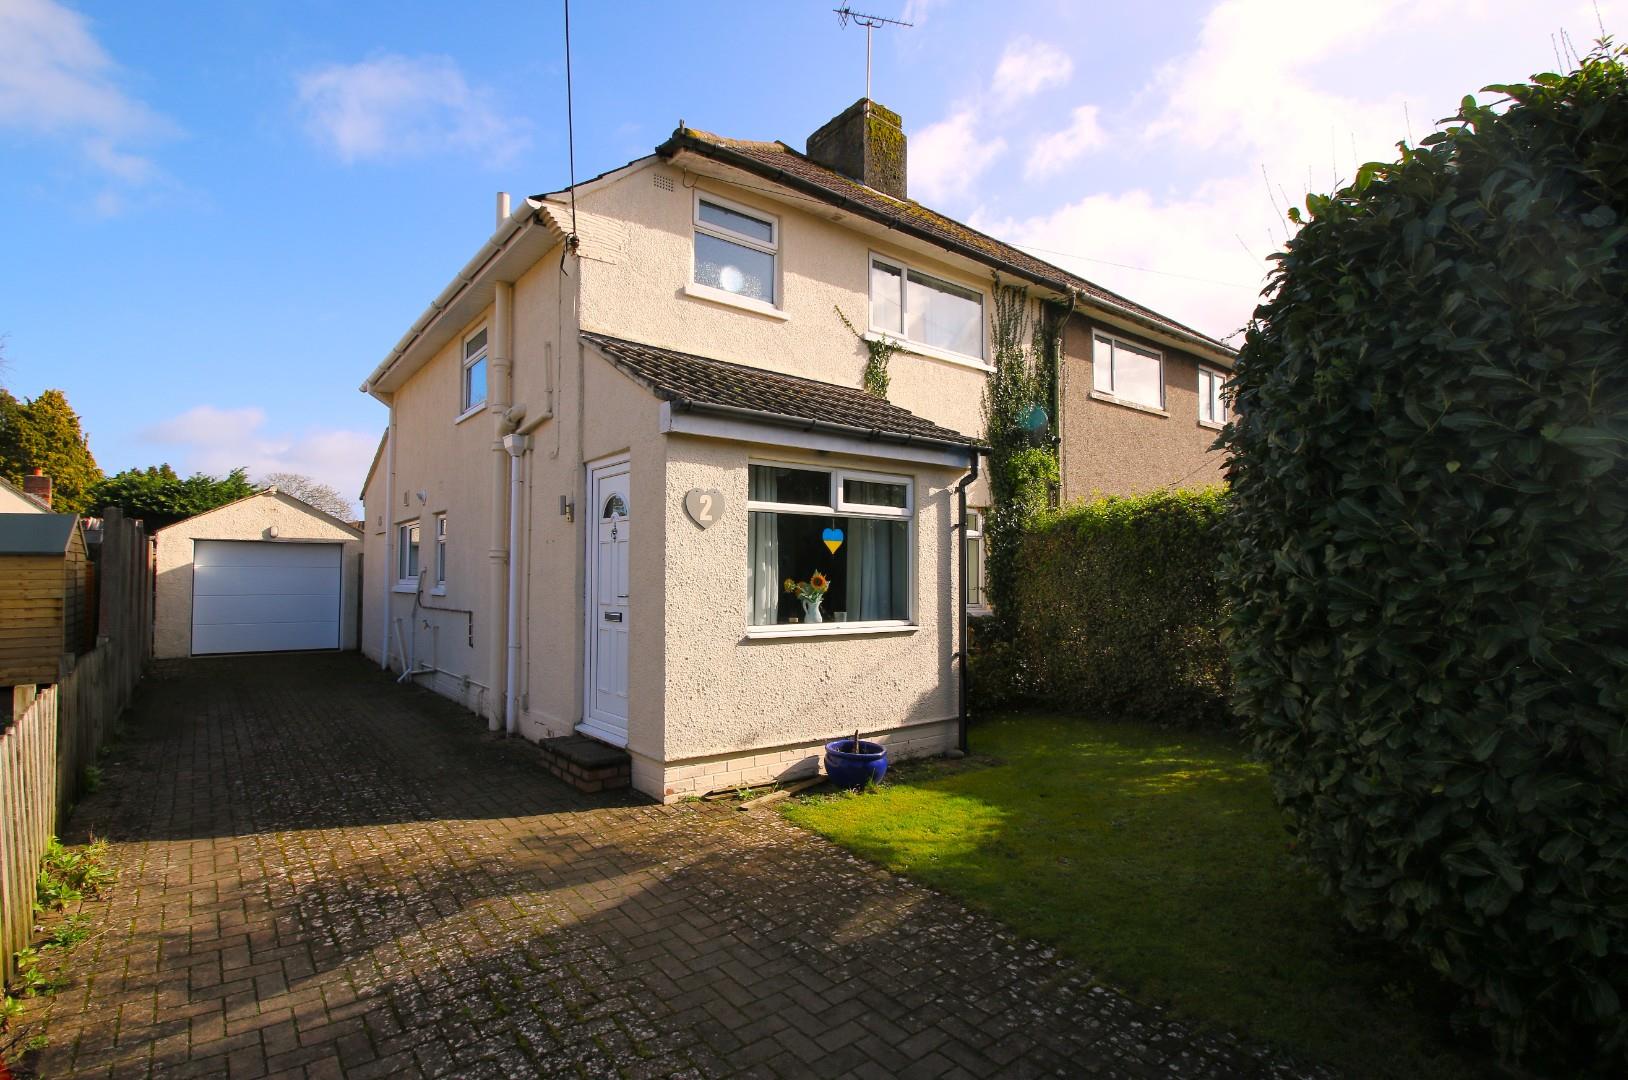 Spacious three bedroom family home situated within a quiet cul-de-sac in Yatton